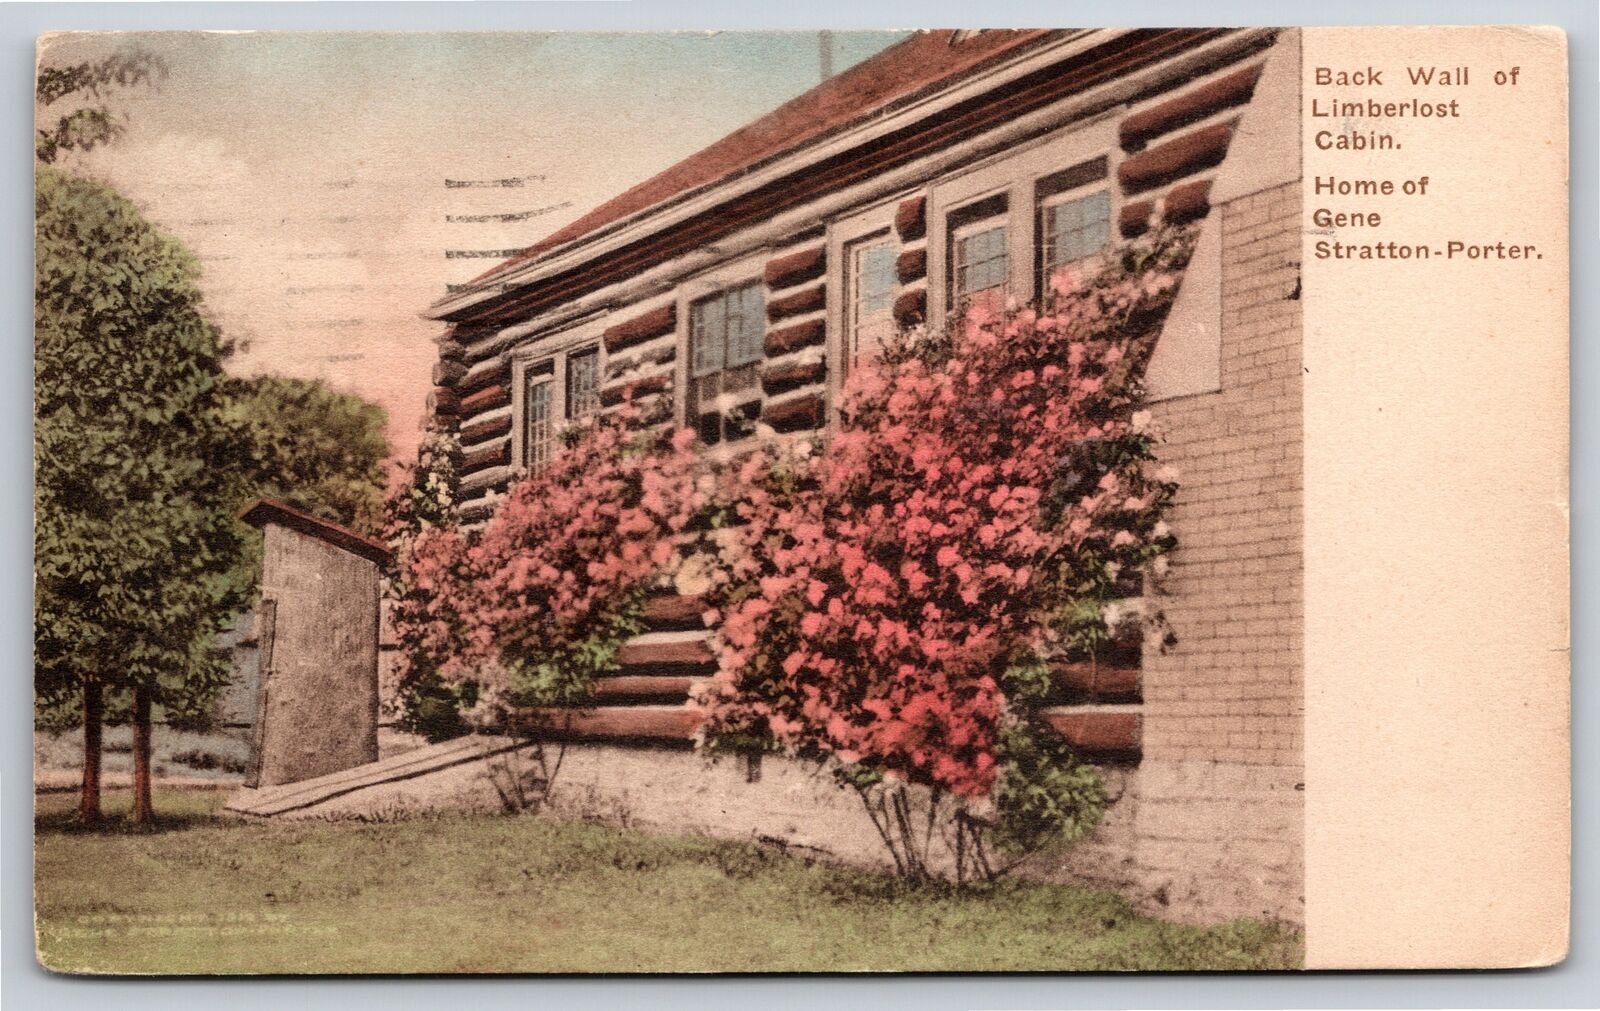 Hand-Colored~Back Wall Limberlost Cabin Muncie Indiana~Vintage Postcard